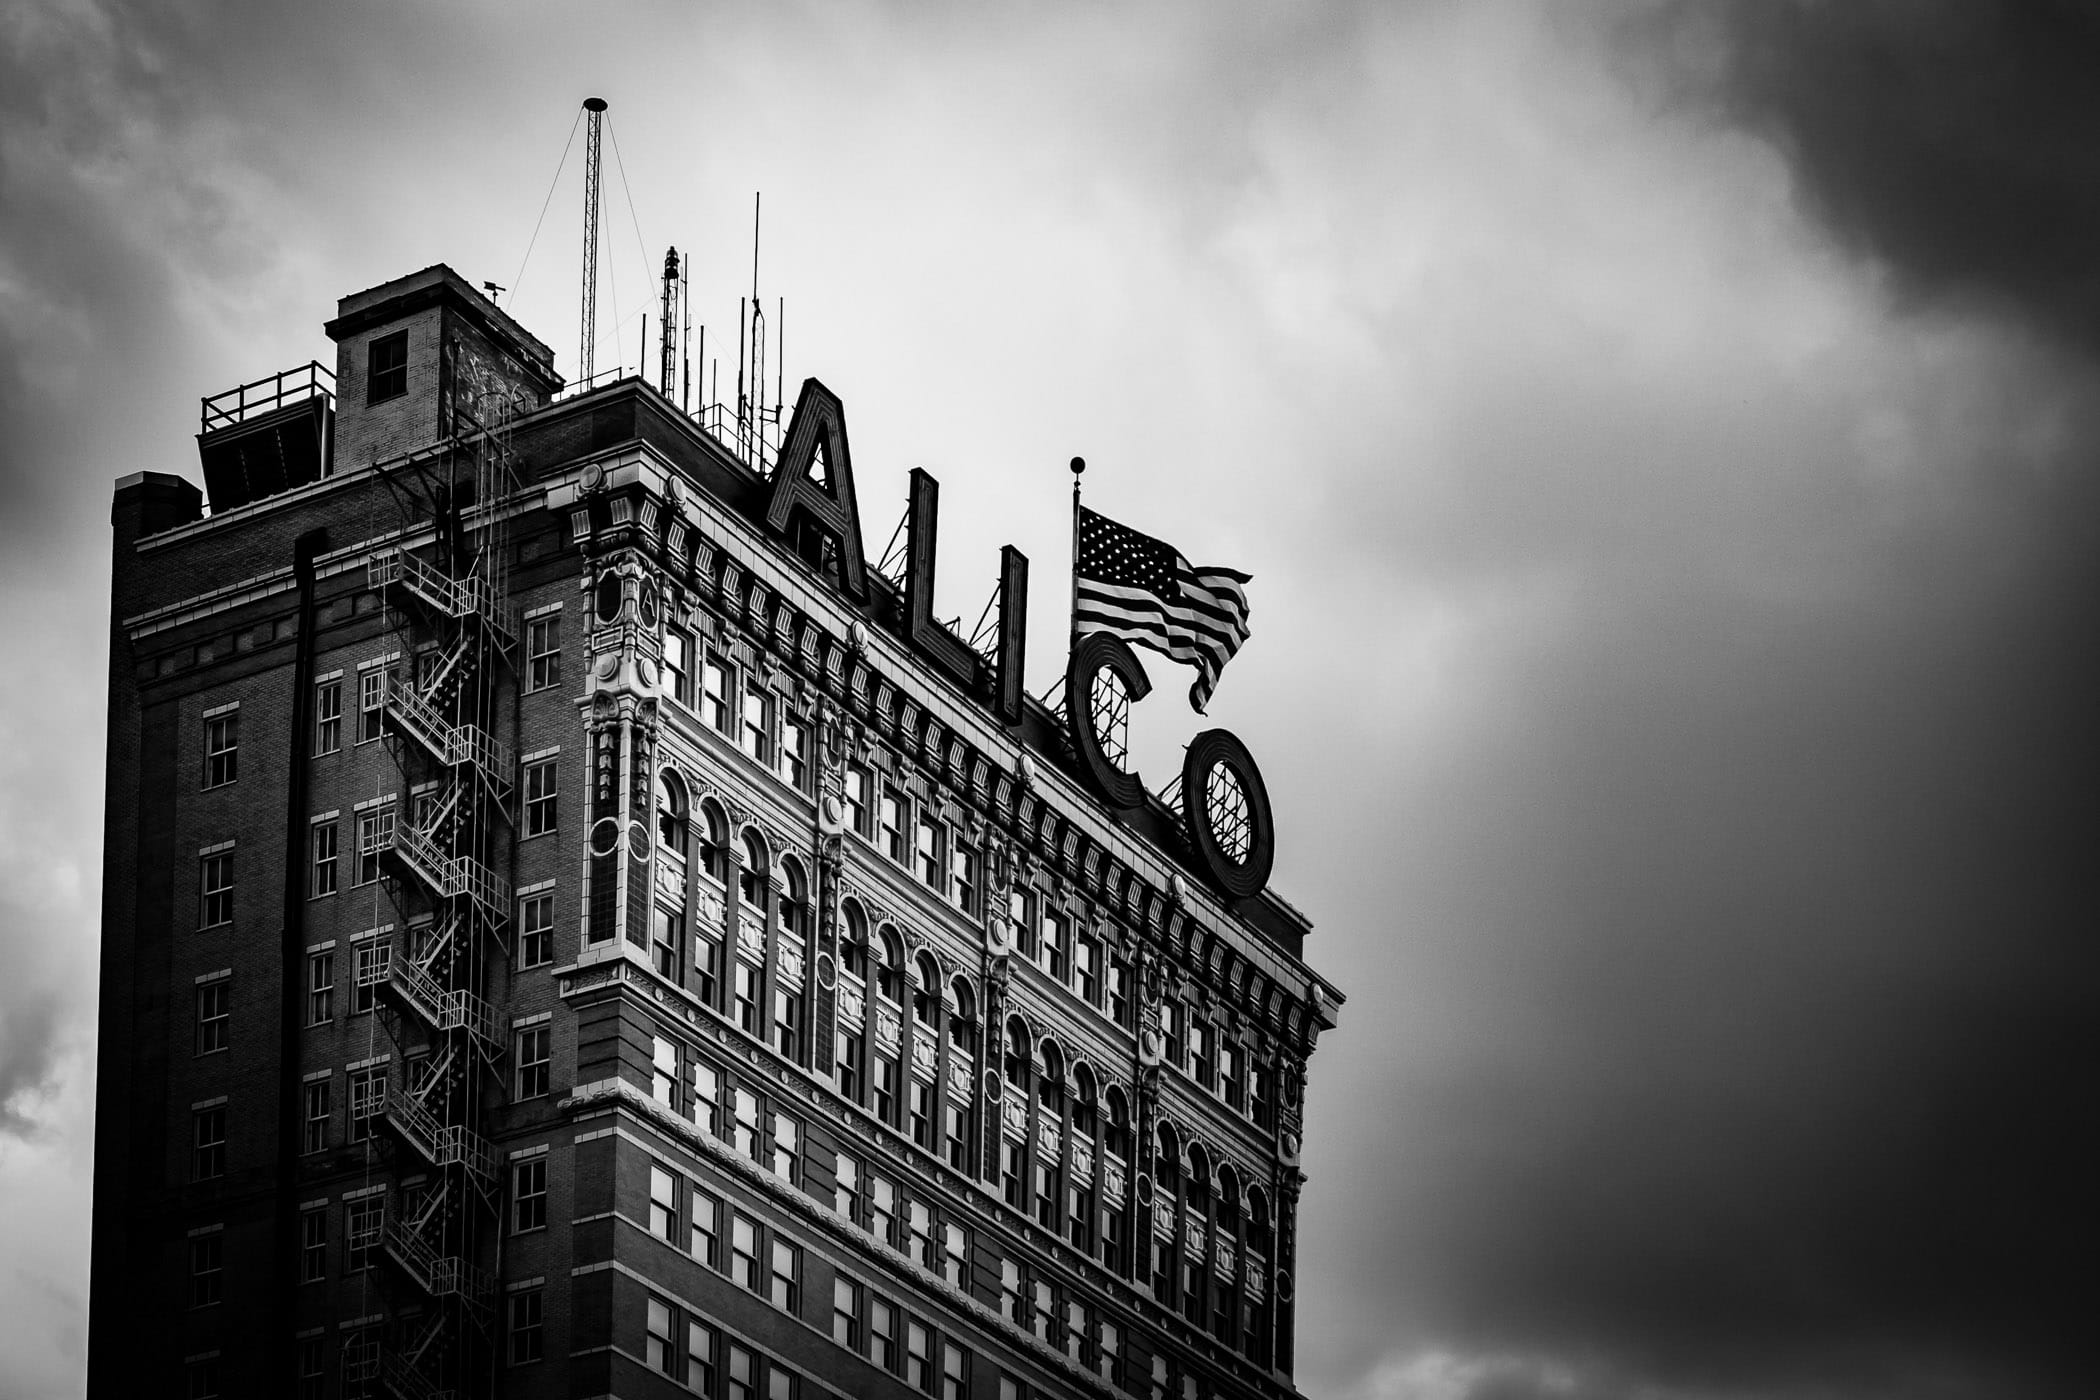 The ALICO building in Downtown Waco, Texas.